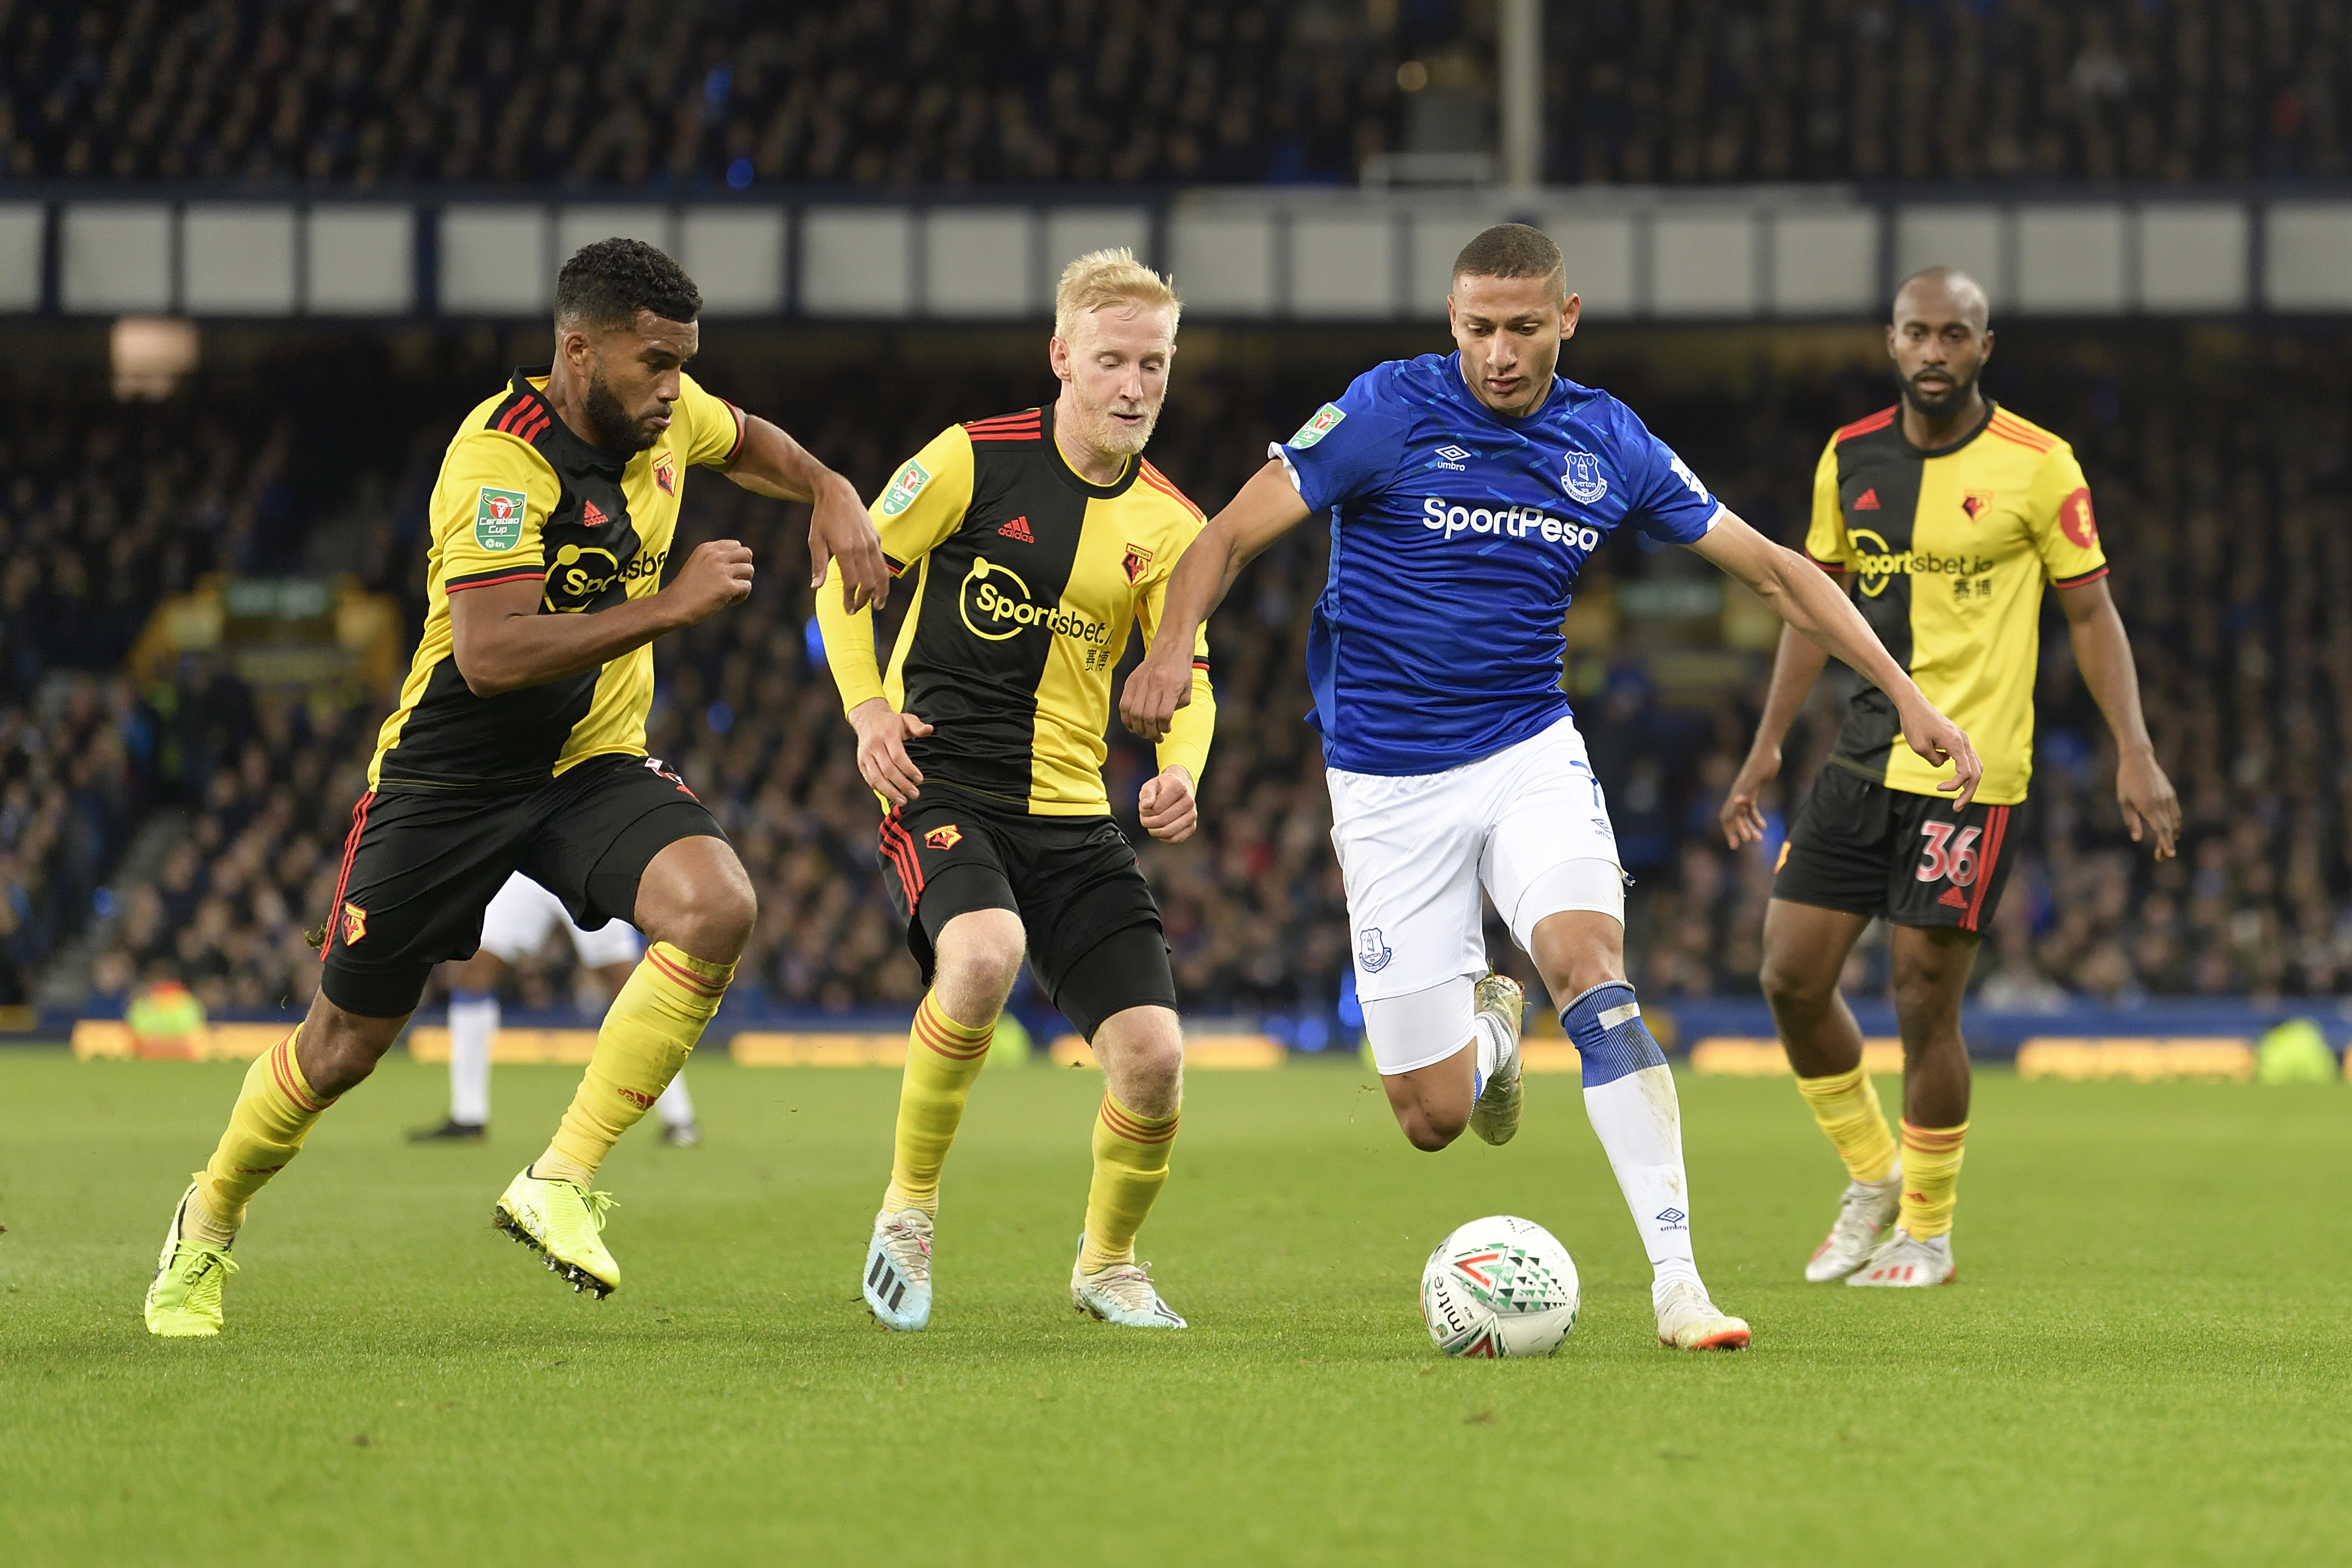 Everton FC v Watford FC - Carabao Cup Round of 16